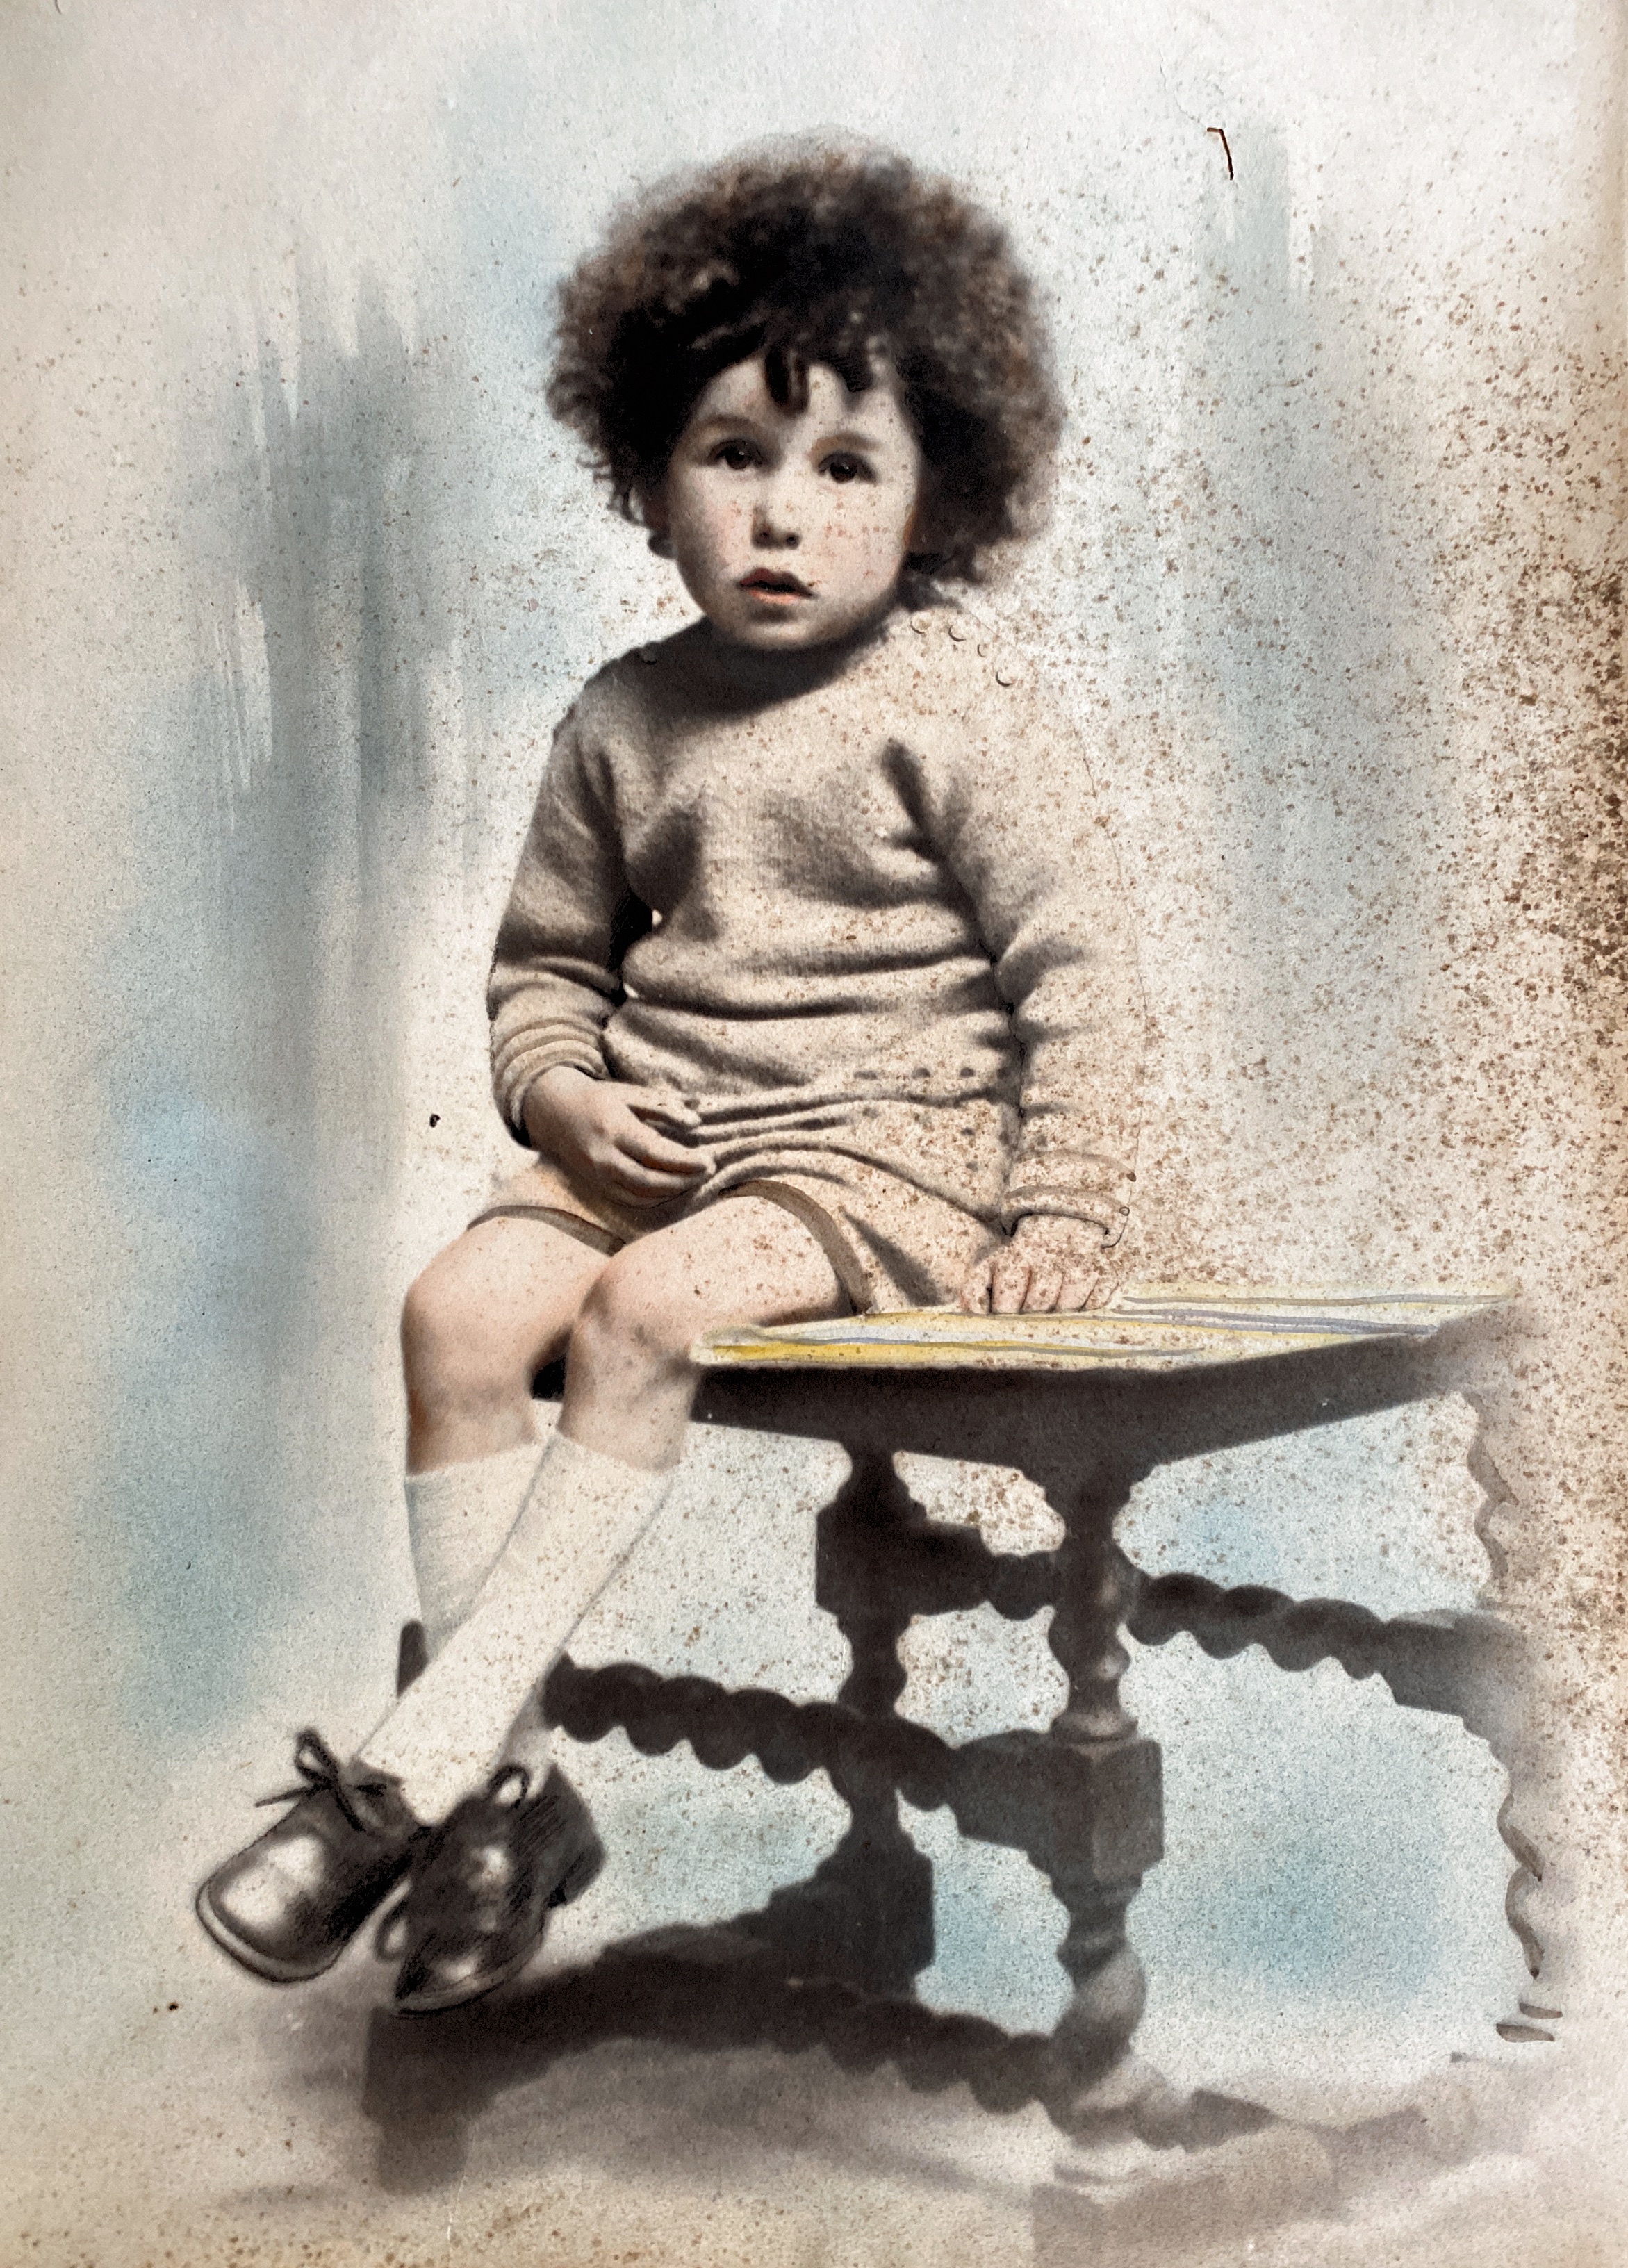 Dad photographed during 1924 aged 3!